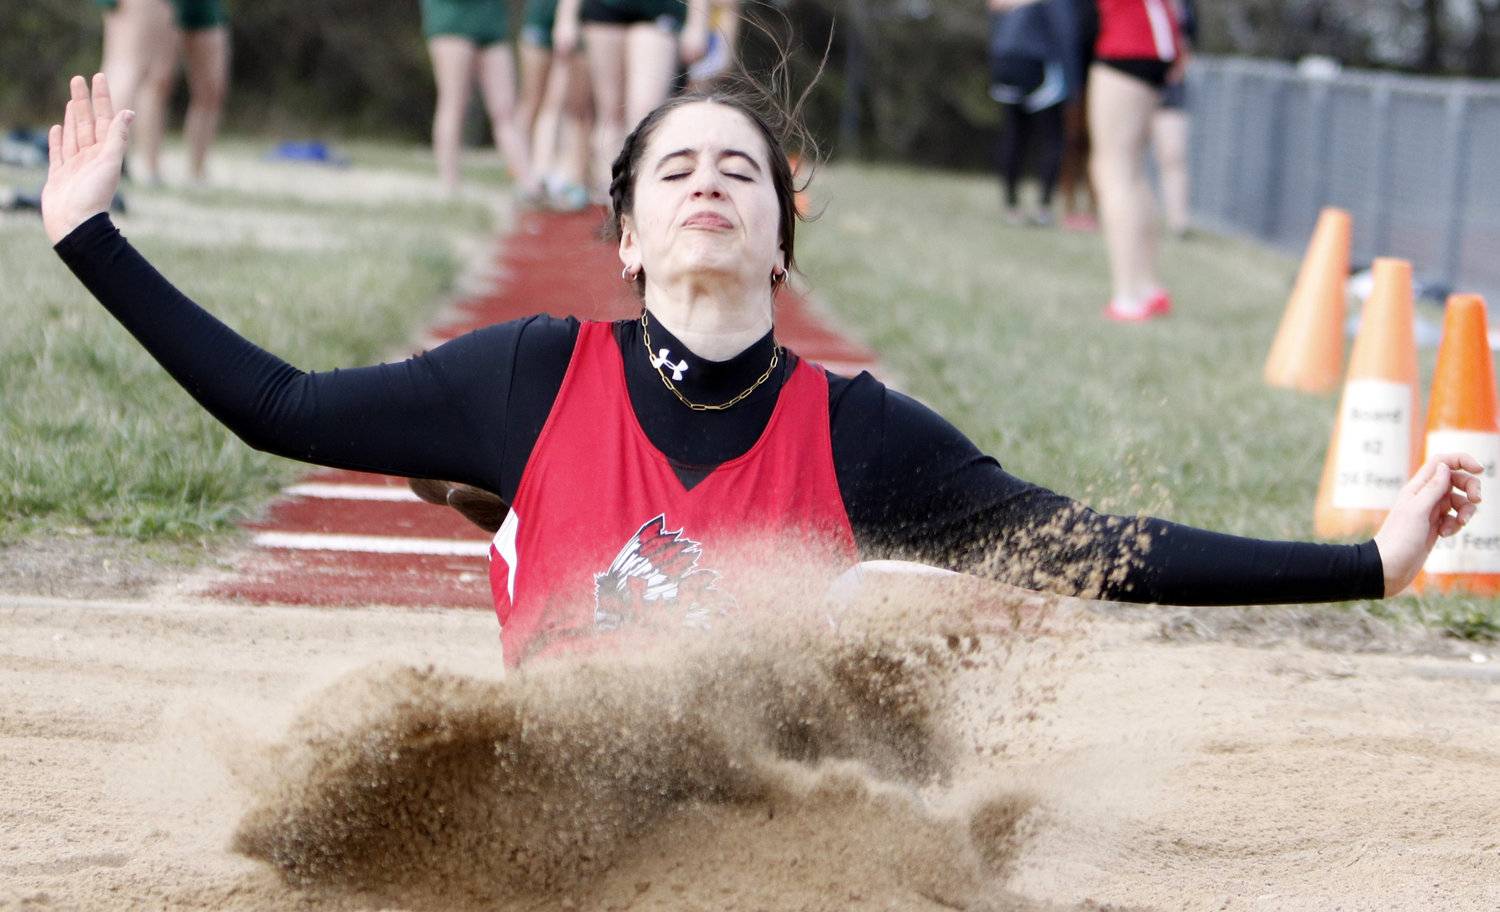 Kiera Daniel lands in the sand pit during the long jump competition.